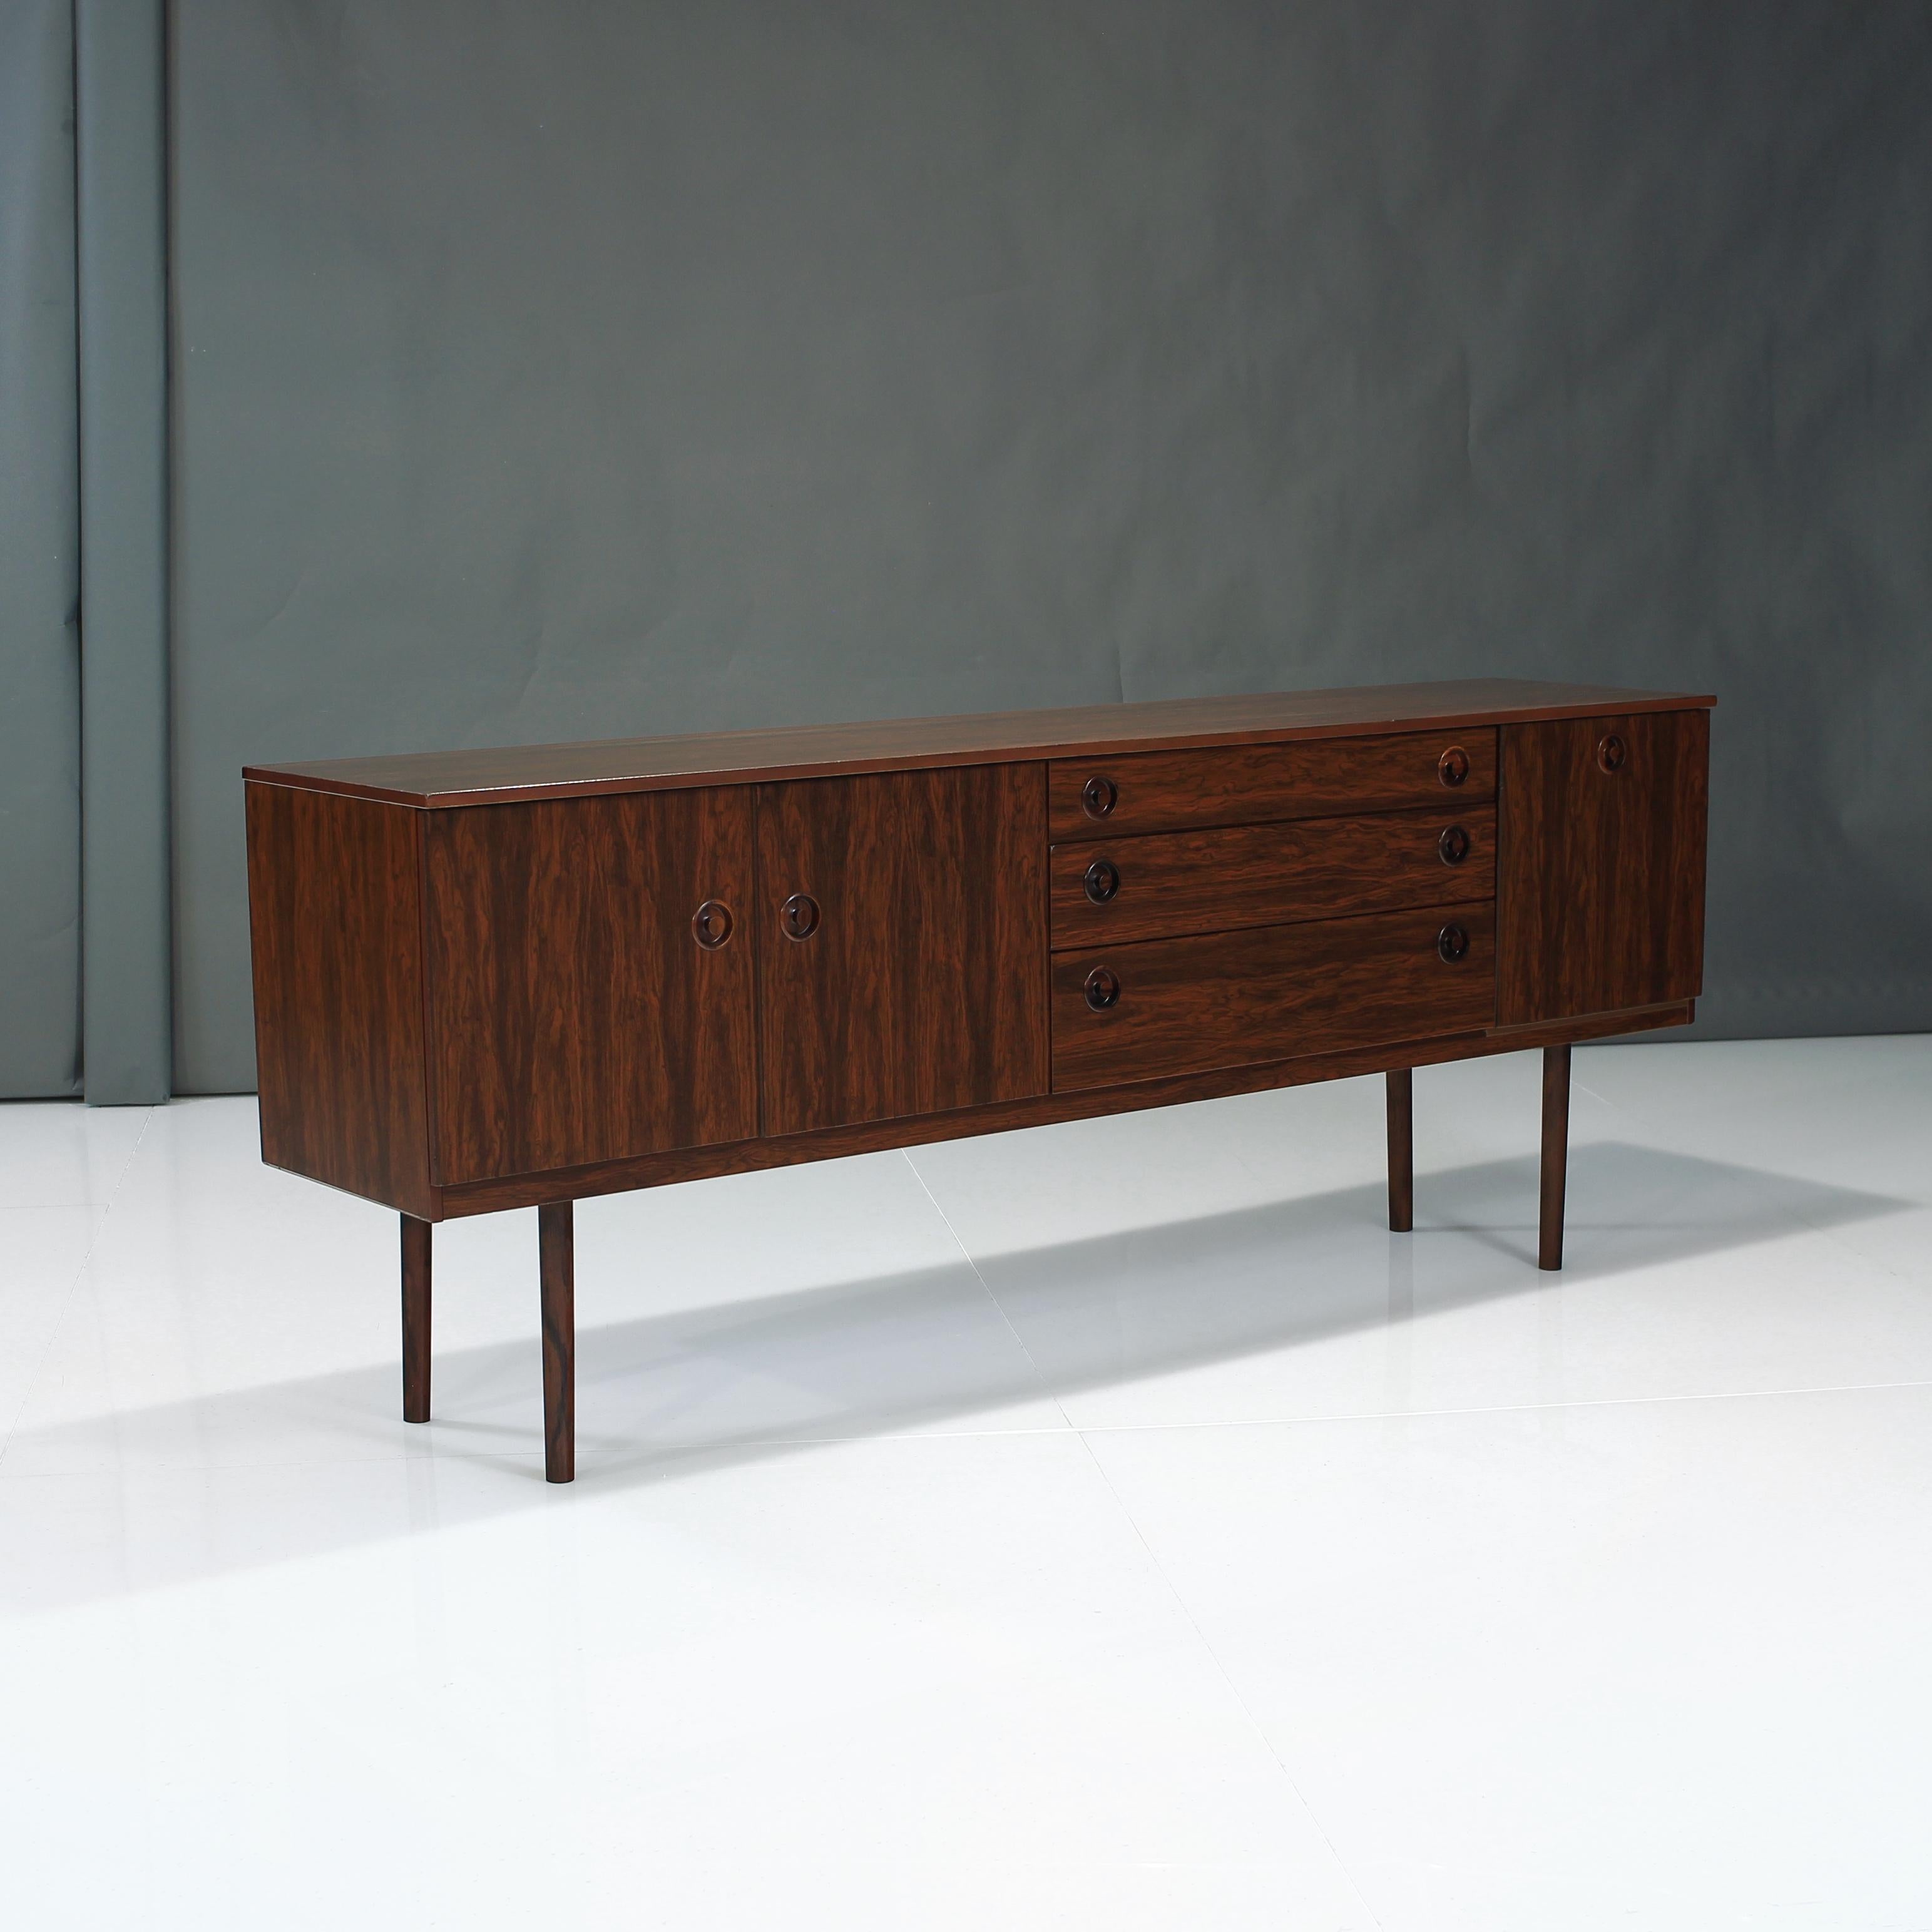 English Mid-Century Modern Rosewood Credenza For Sale